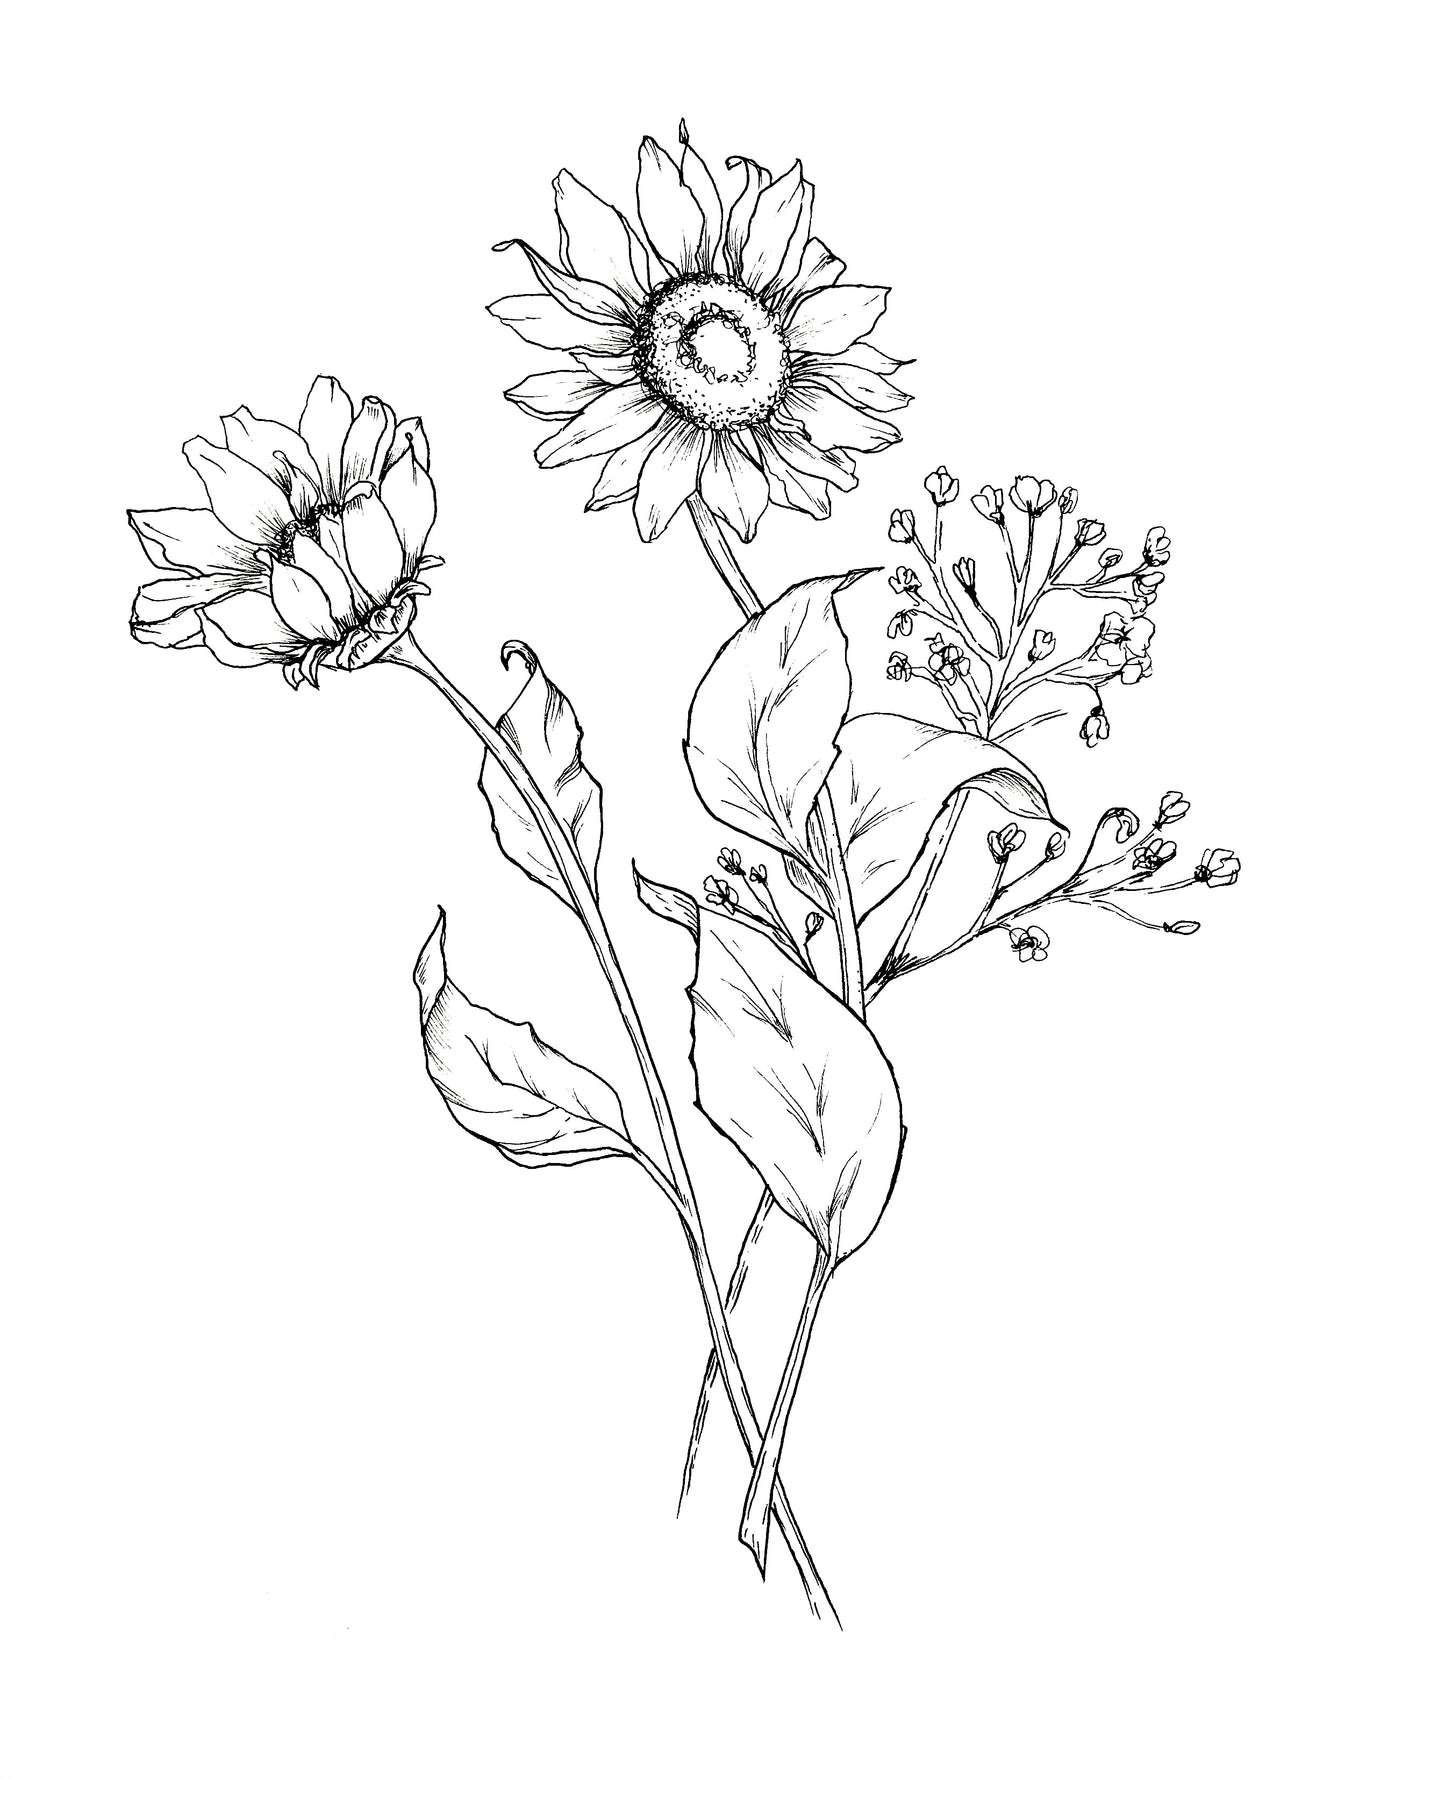 Free colouring page of a sunflower and gypsy-weed design created in fineliner pen on white background.